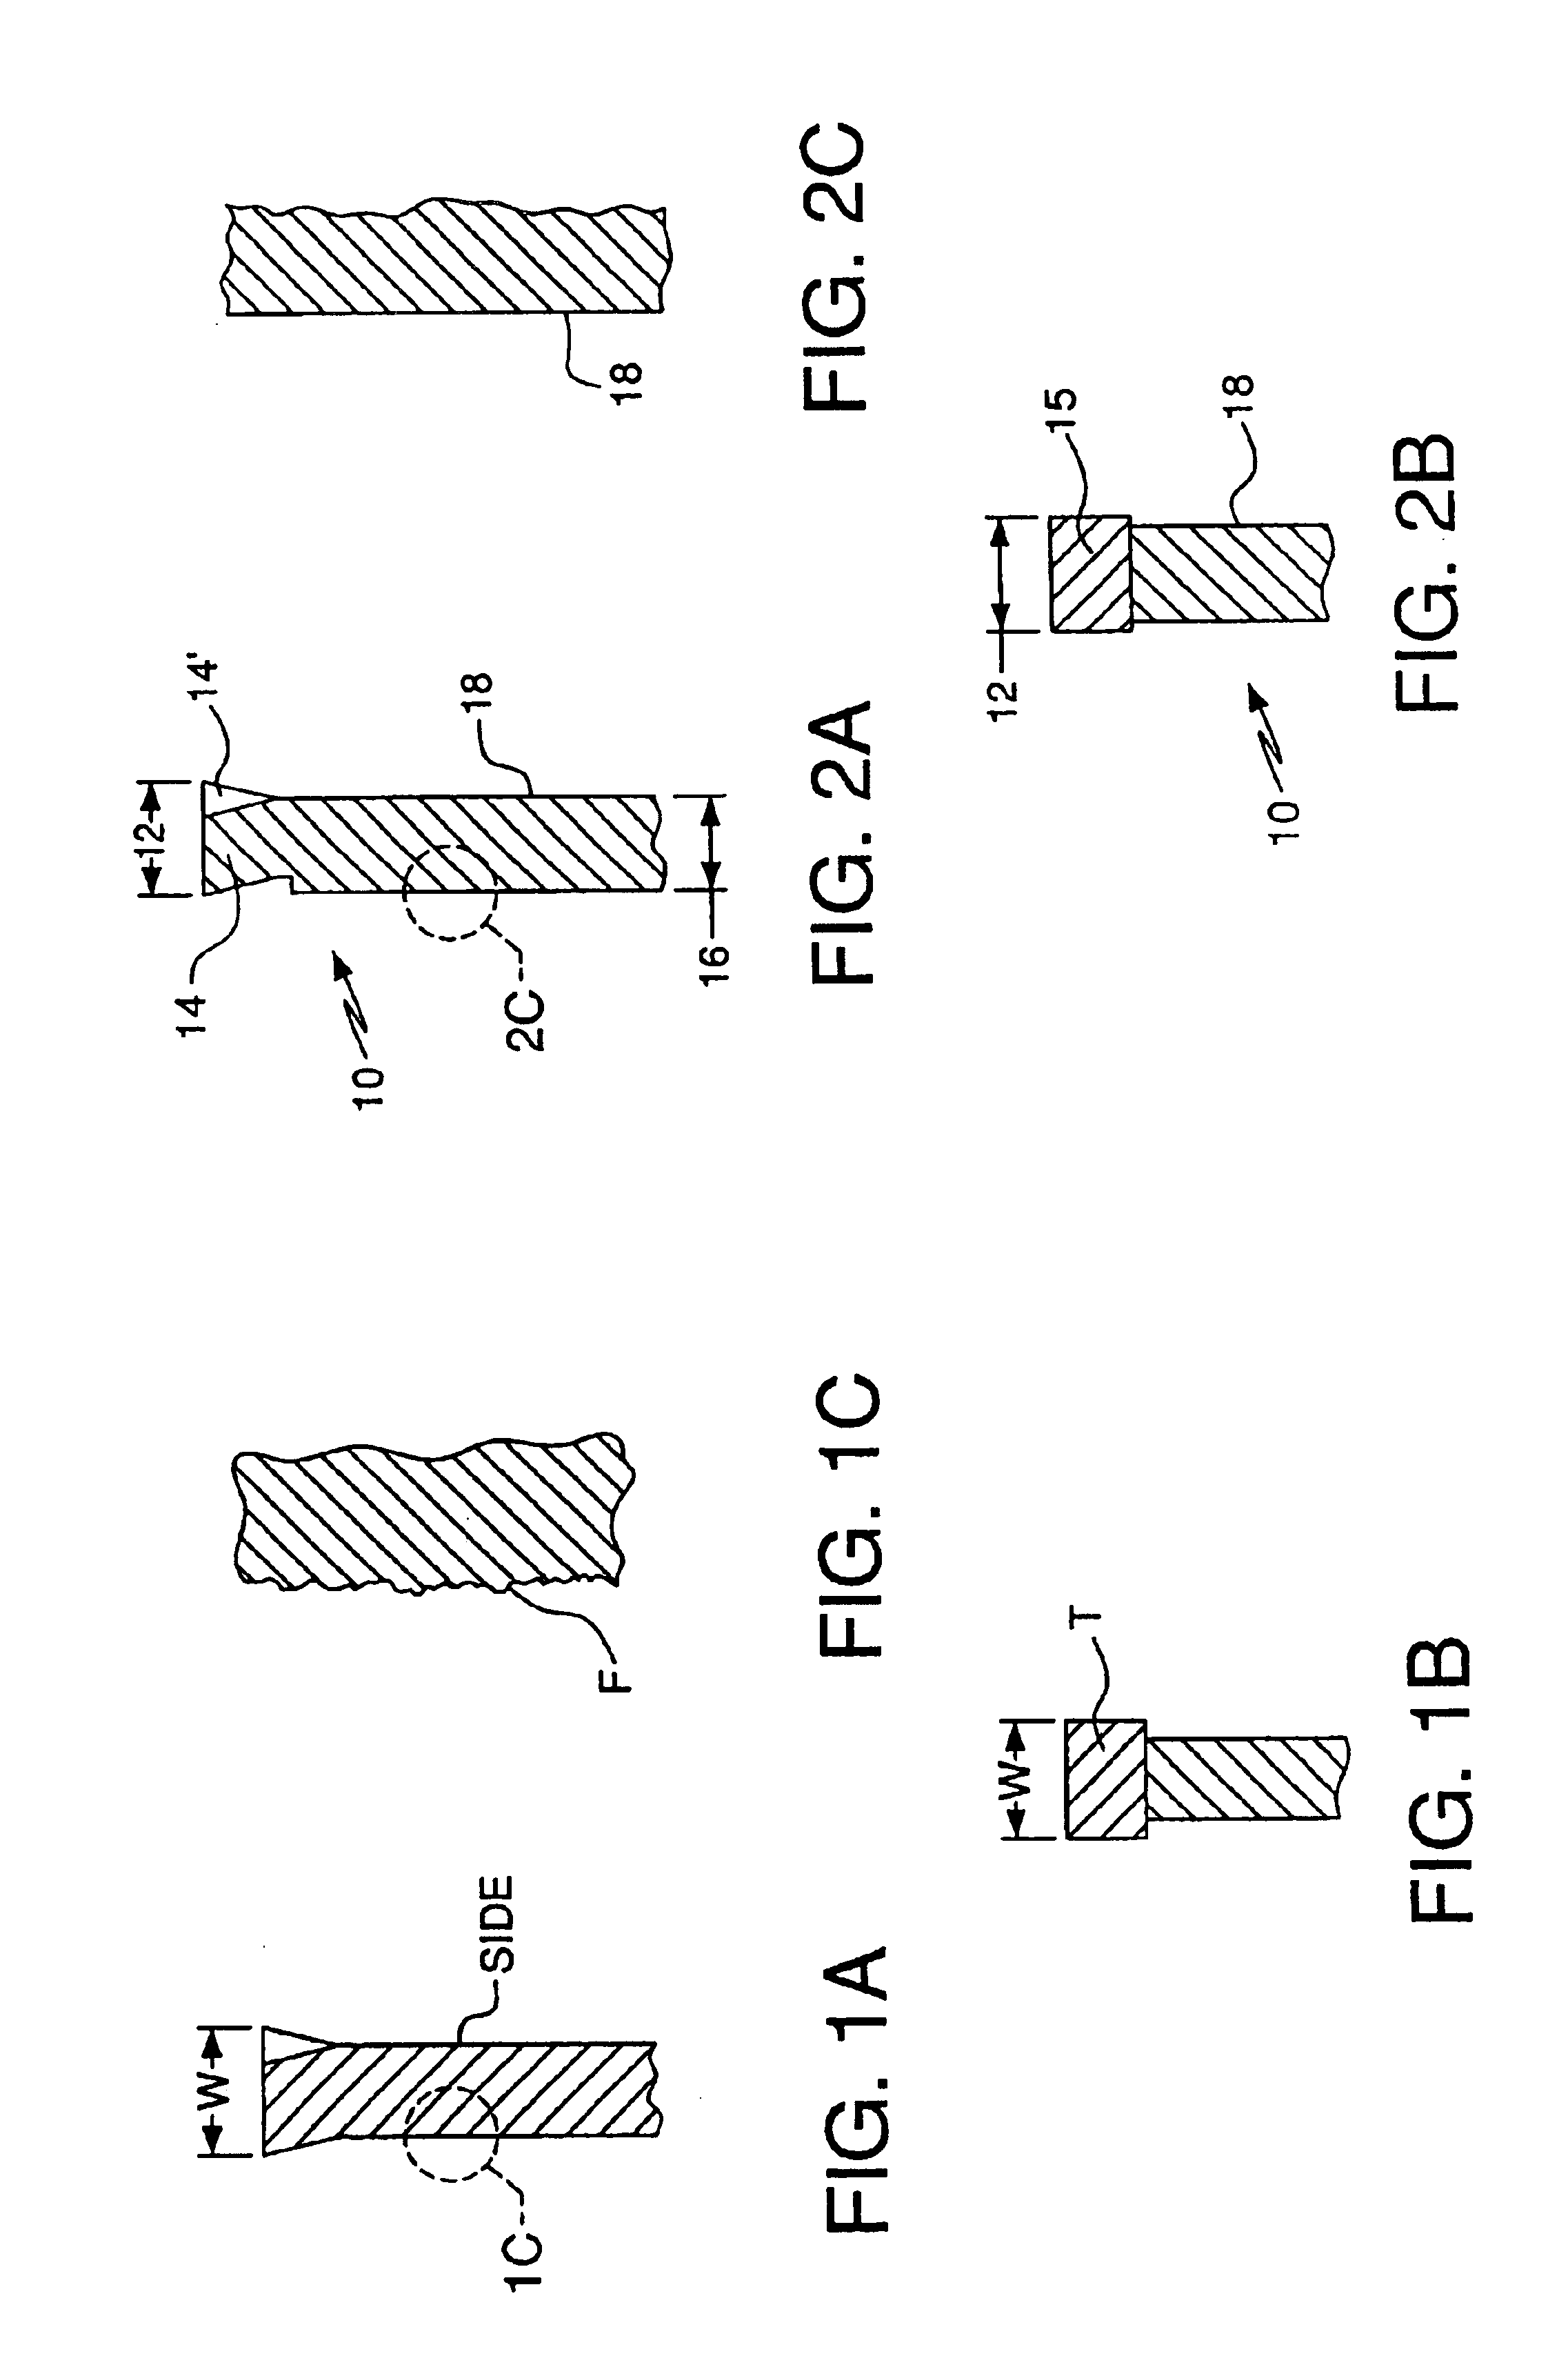 Method of manufacturing a tool using a rotational processing apparatus